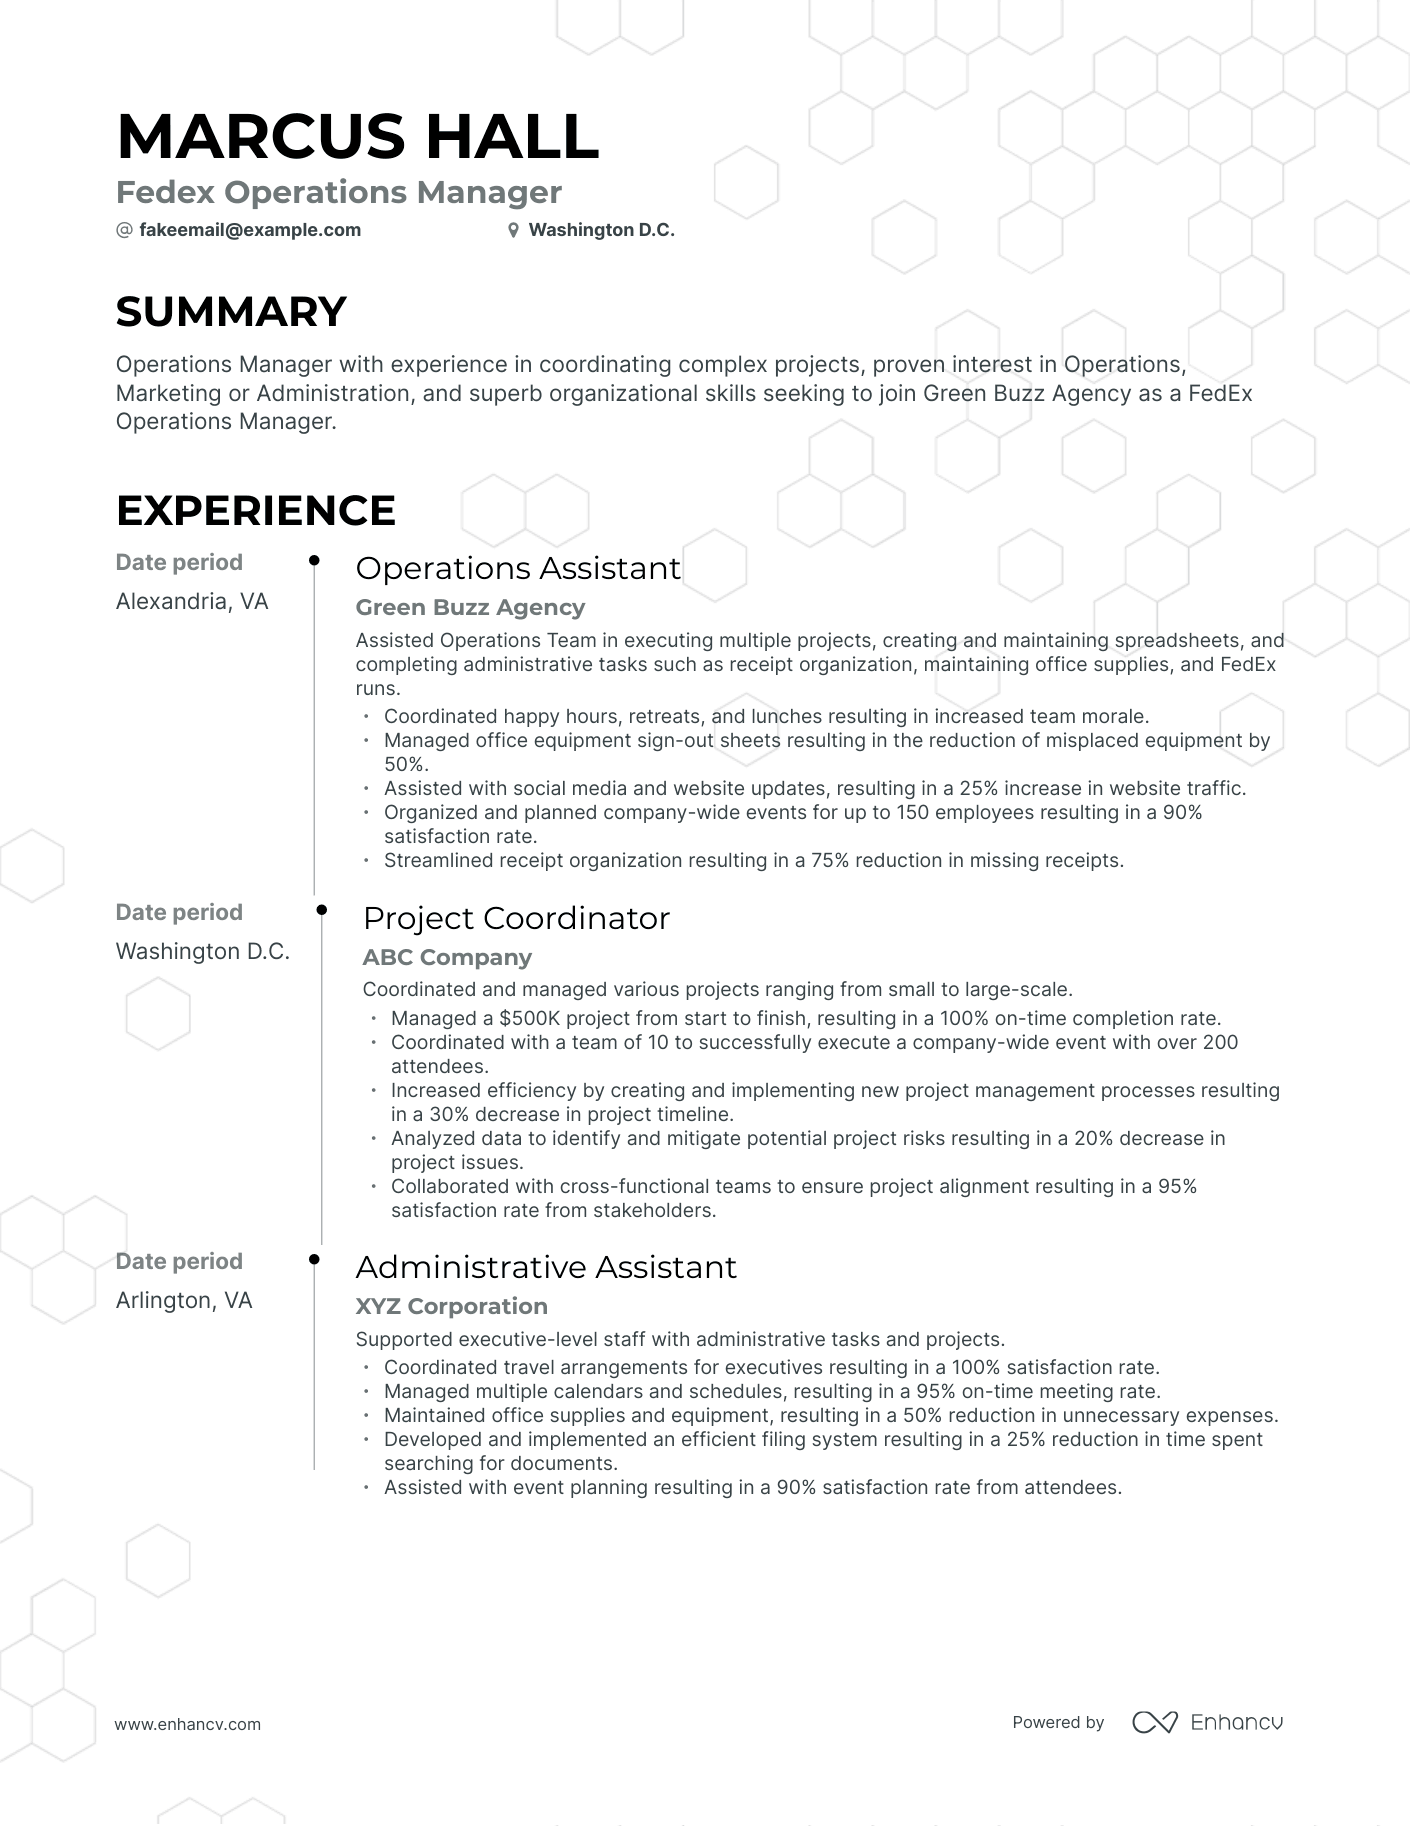 Timeline Fedex Operations Manager Resume Template